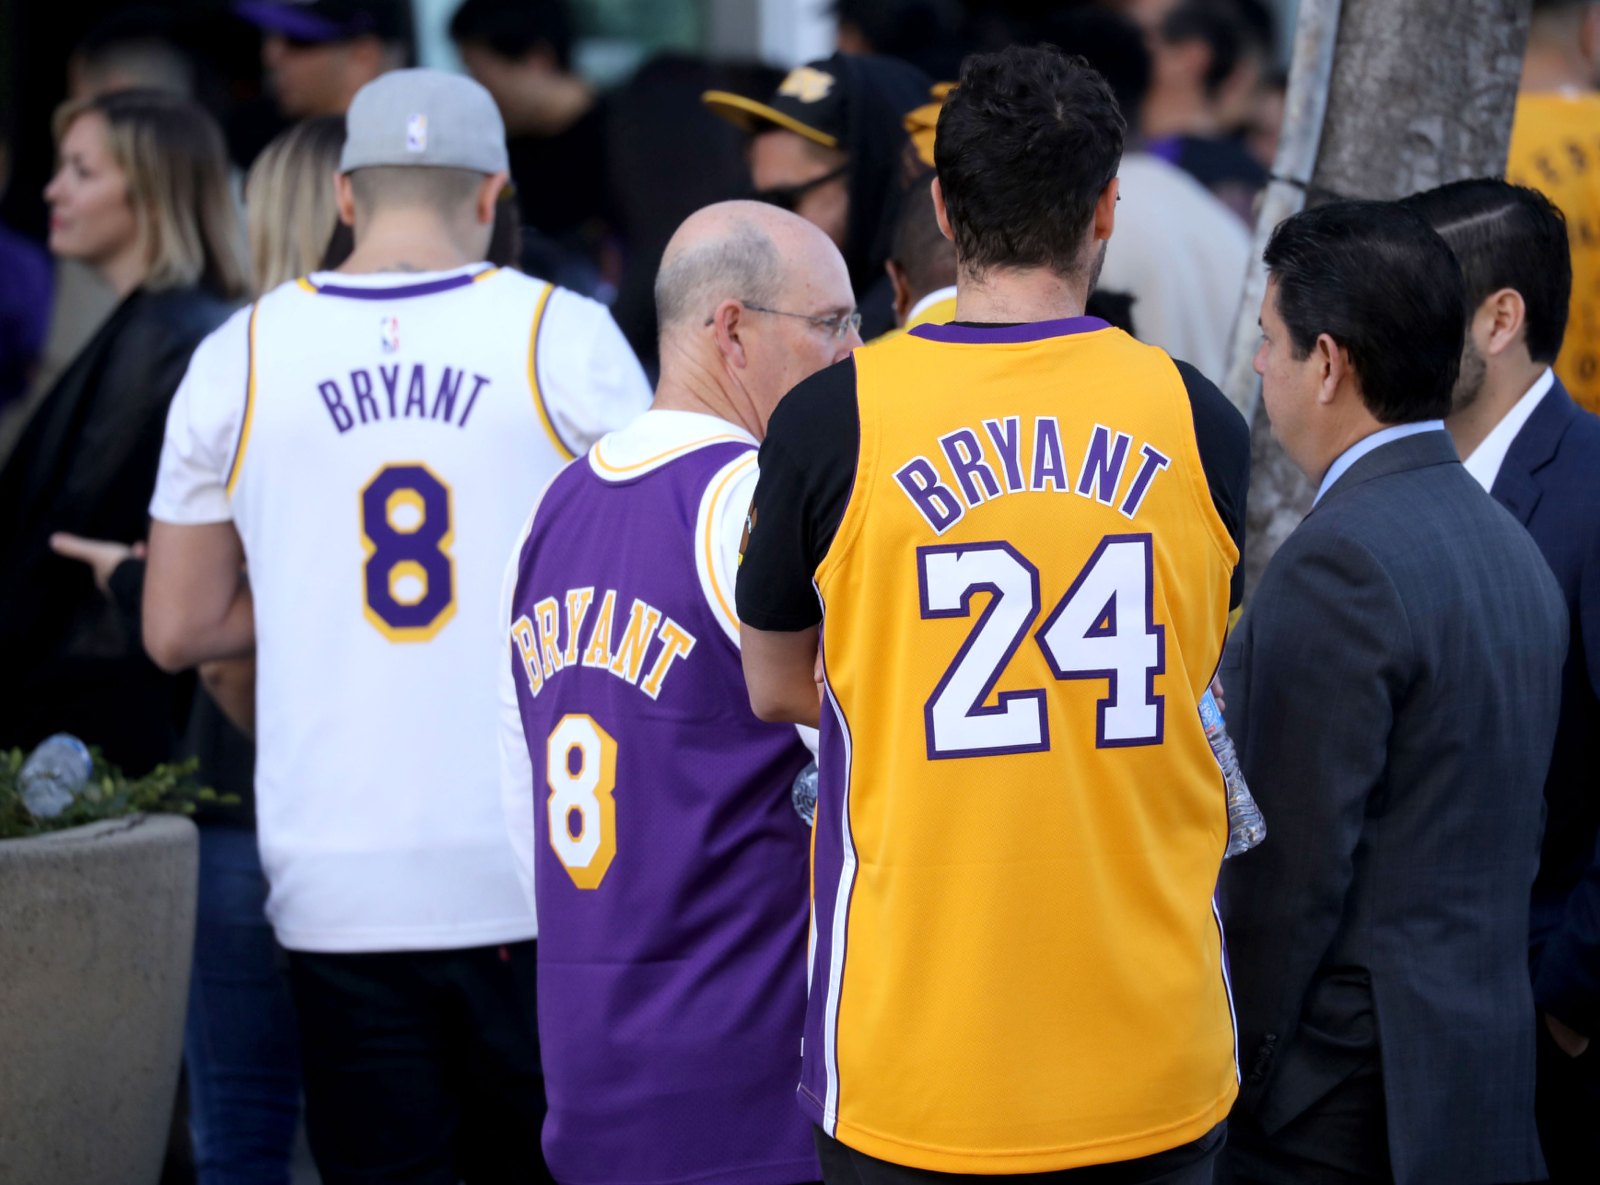 Kobe Bryant, Daughter Gianna Bryant’s Public Memorial After Tragedy